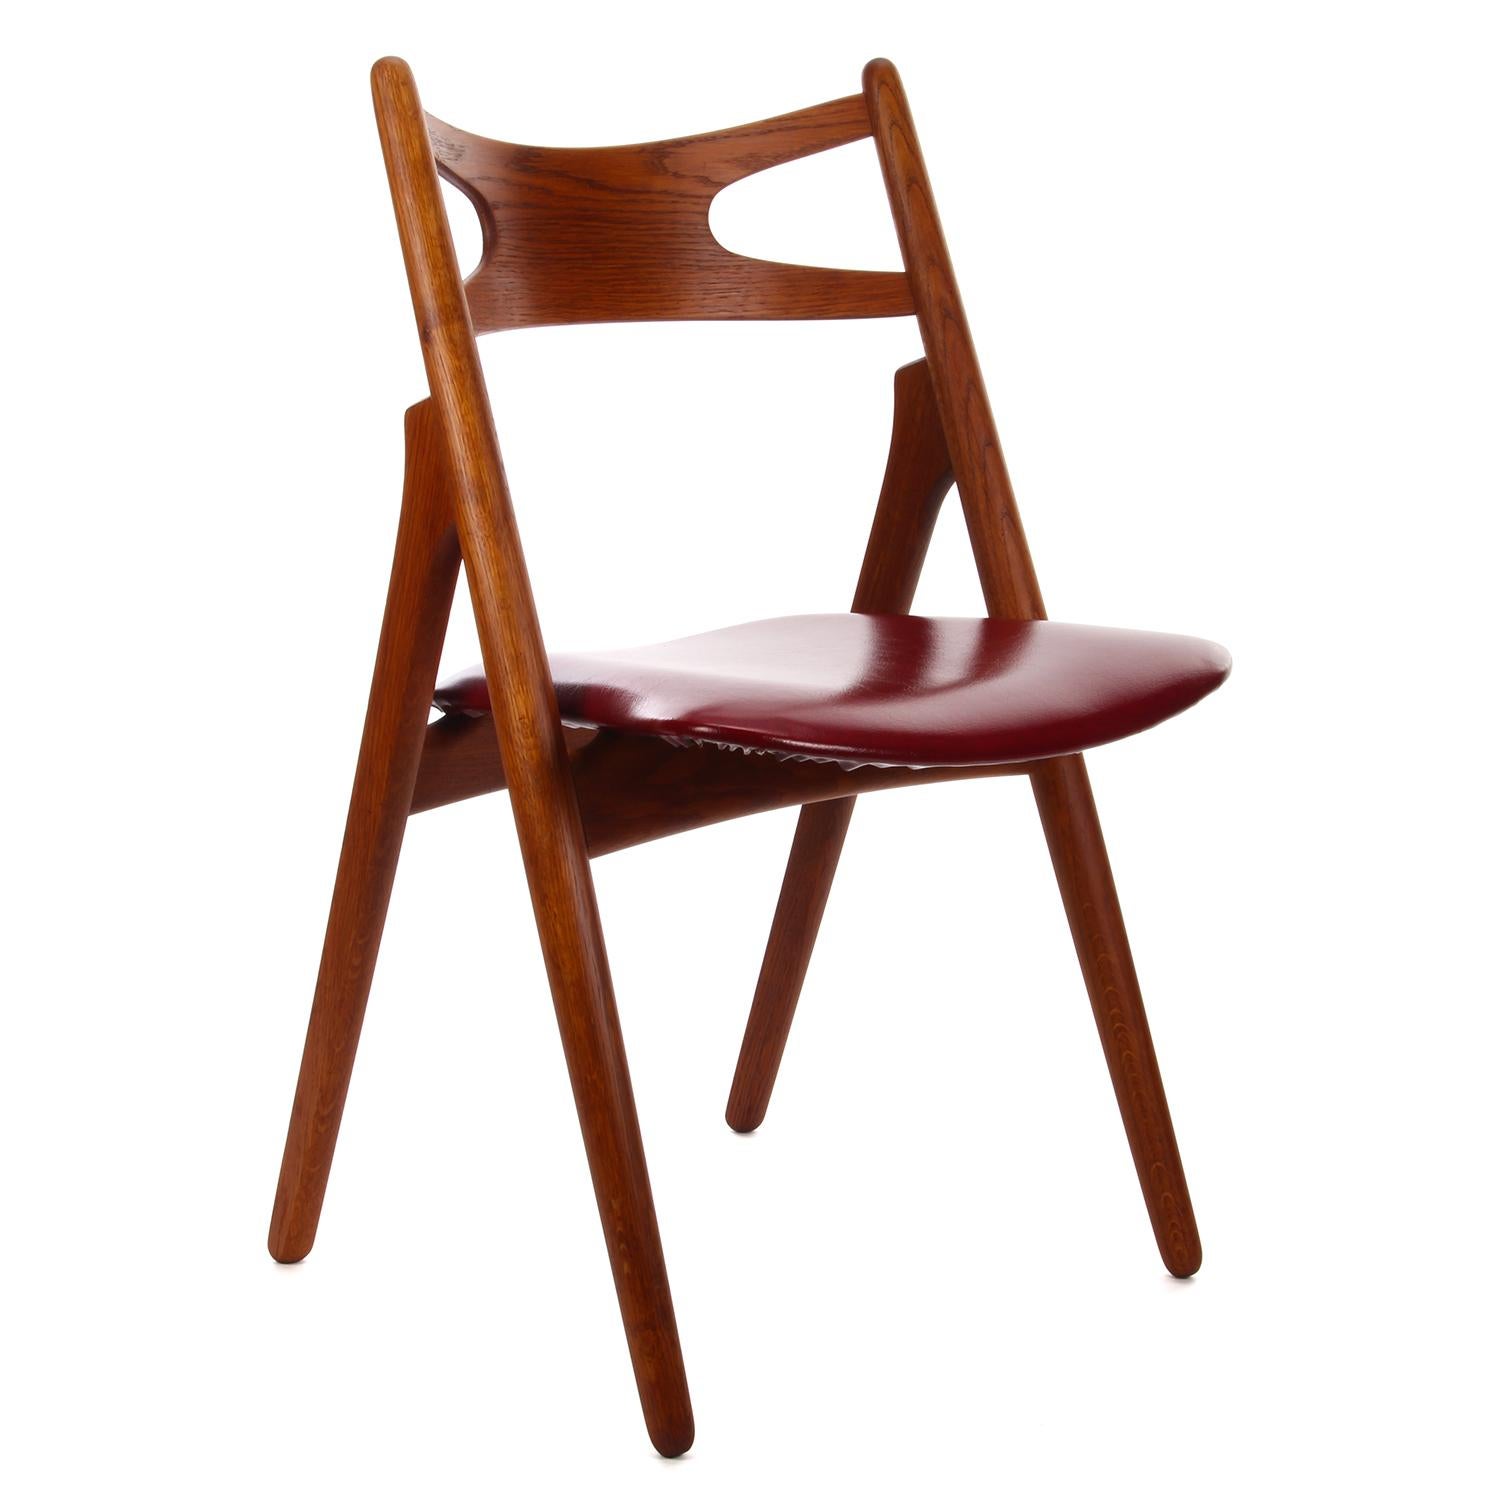 CH29 sawbuck chair by Hans J Wegner in 1952 for Carl Hansen & Son - iconic Danish design. Rare vintage oak dining chair with original wine-red upholstery - in very good vintage condition.

Exceptional comfortable chair with an extremely appealing